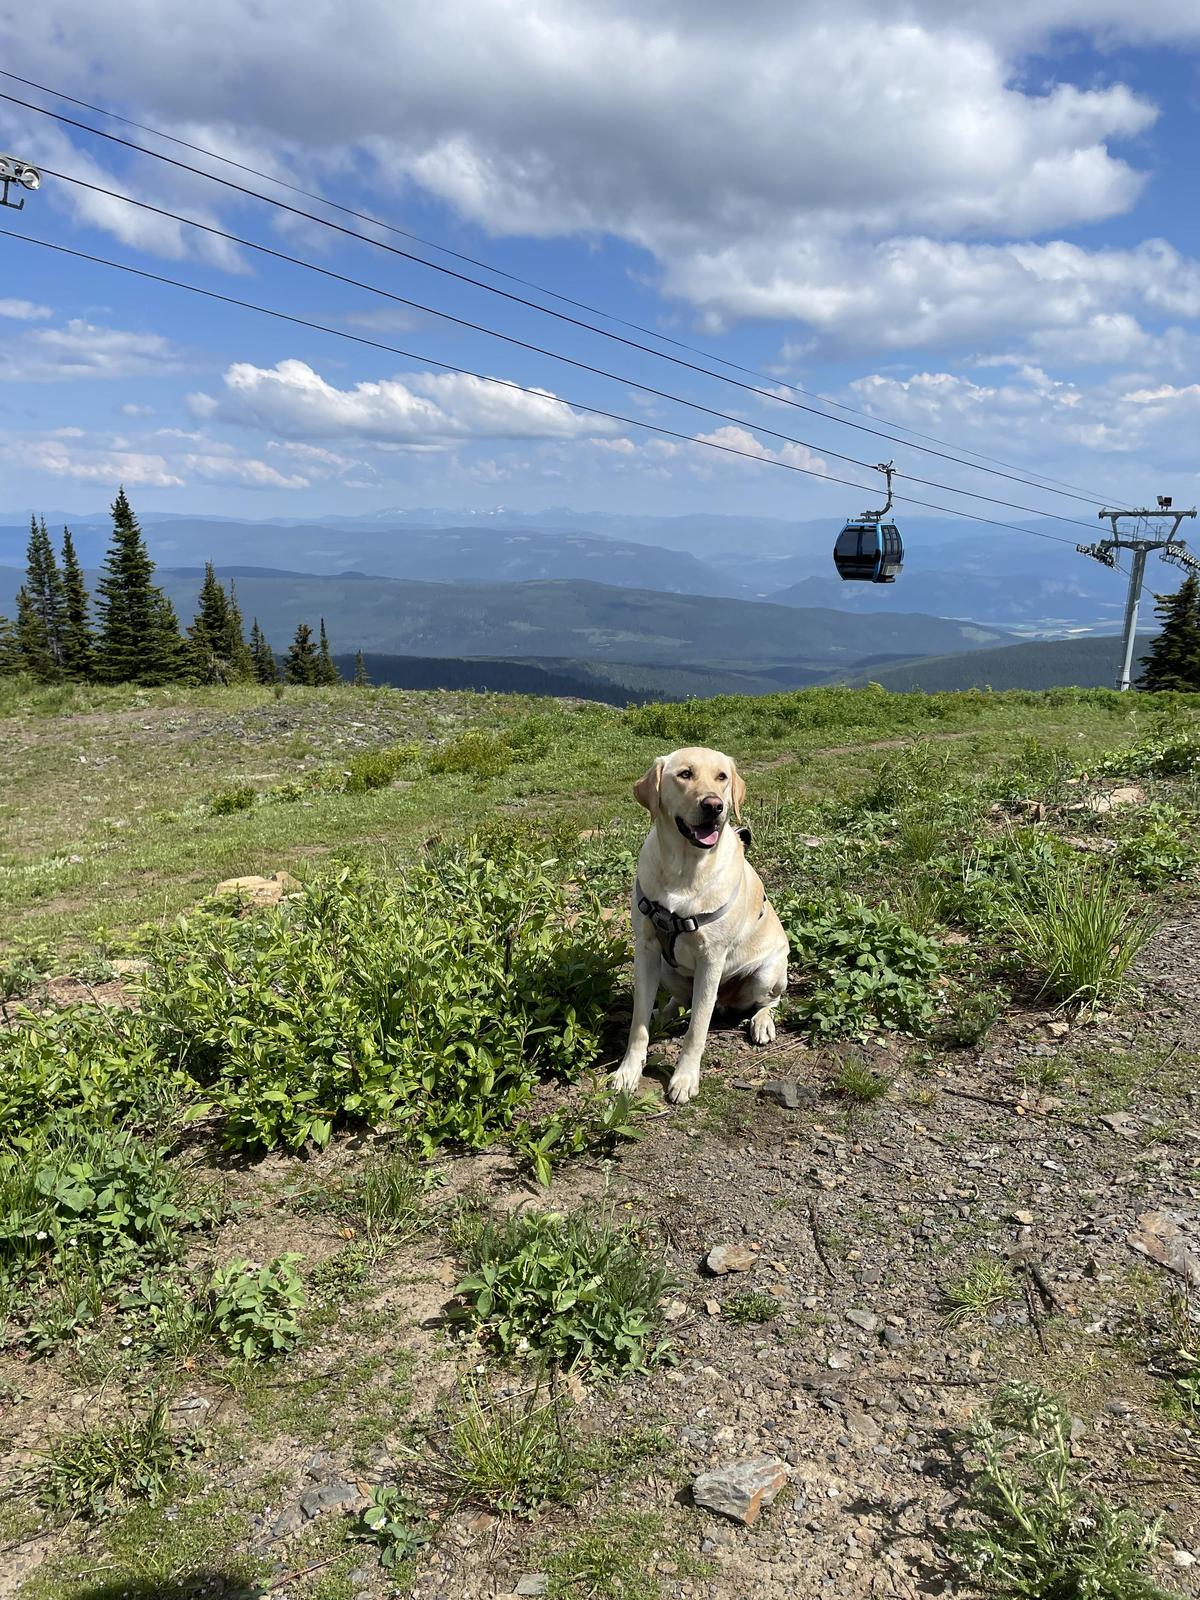 are dogs allowed at silver mountain resort